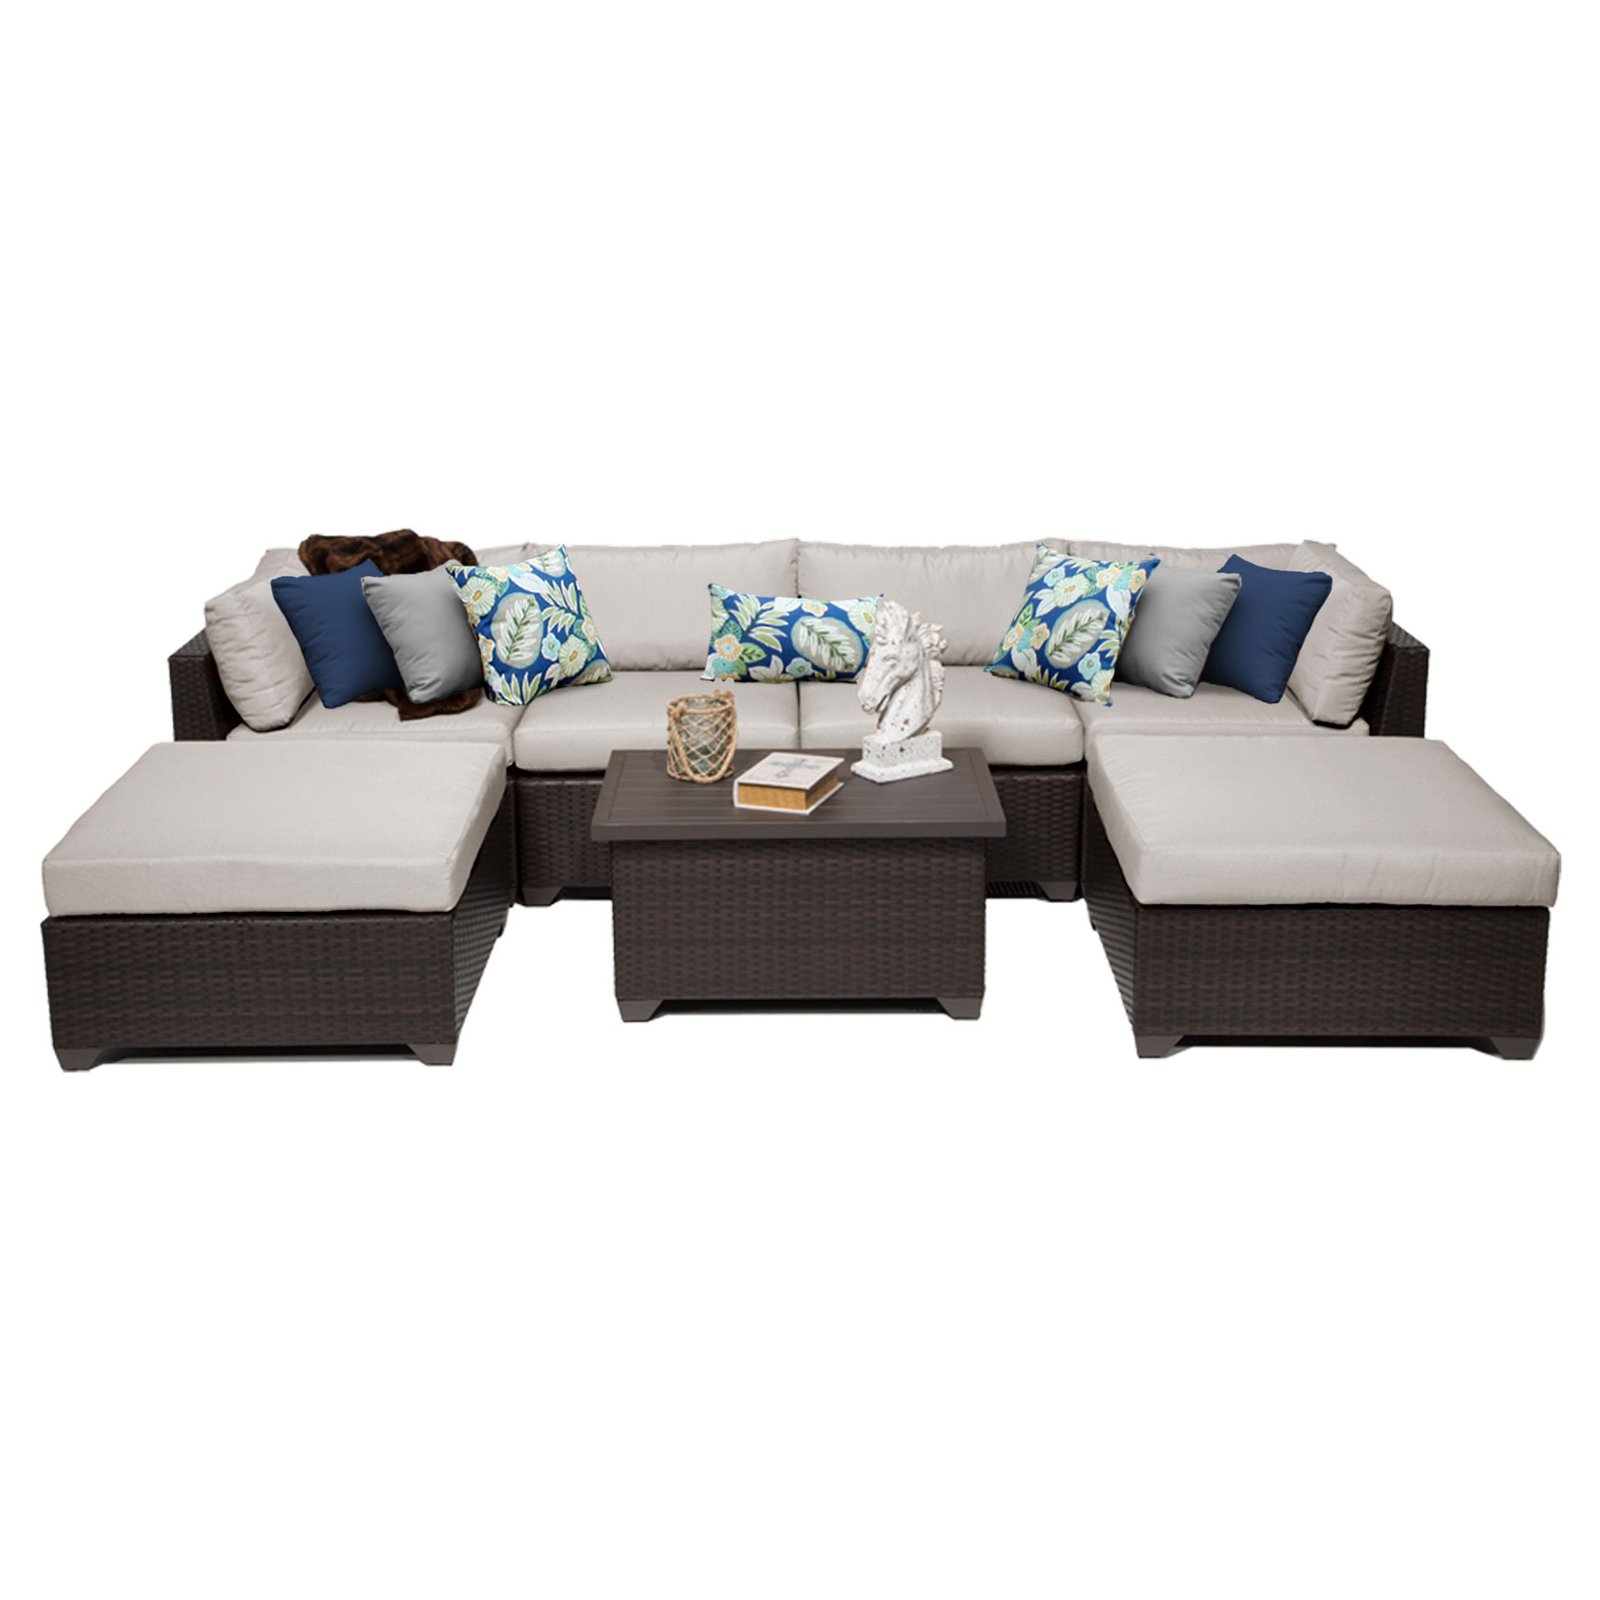 TK Classics Belle Wicker 7 Piece Patio Conversation Set with Ottoman and 2 Sets of Cushion Covers - image 2 of 2